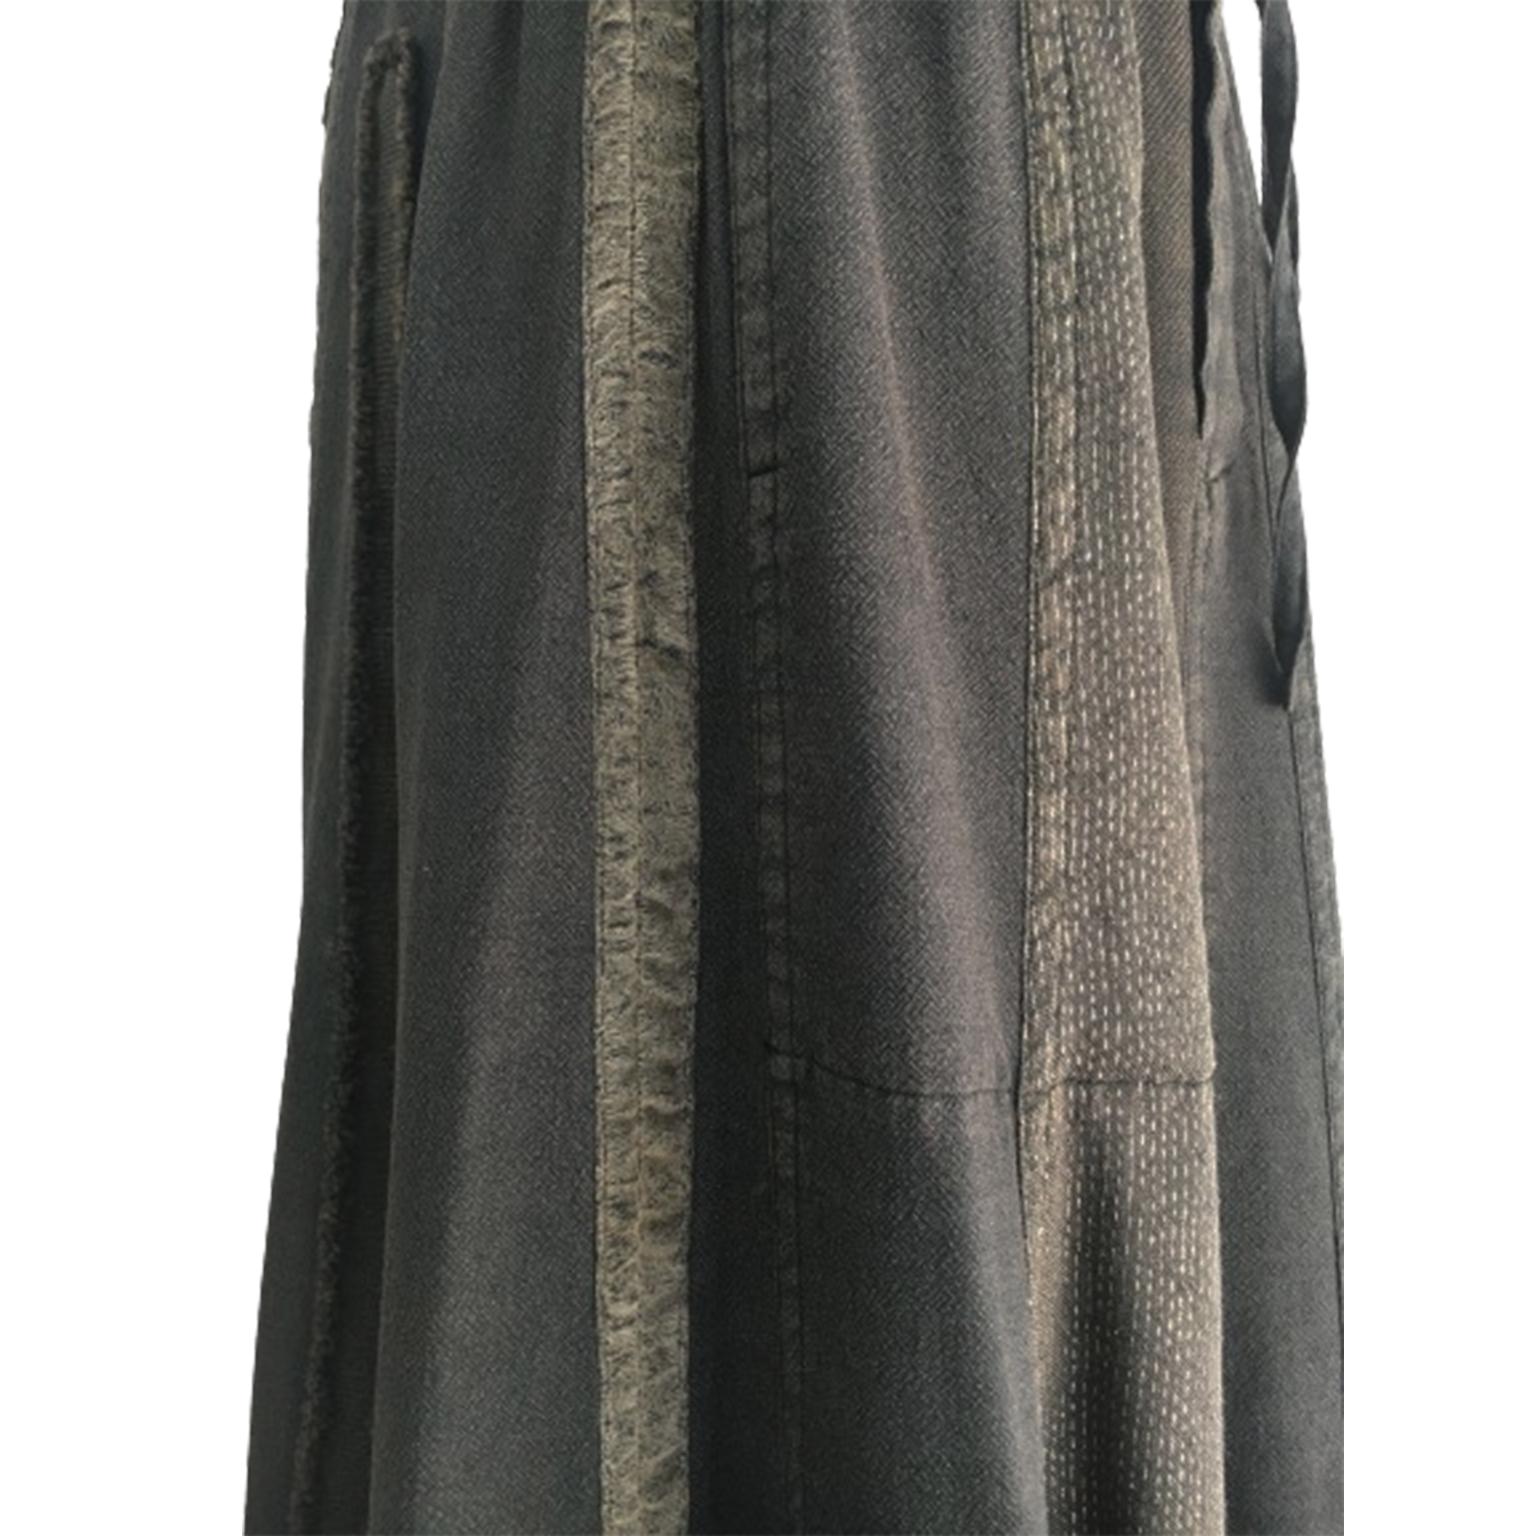 Issey Miyake HaaT Earth Tone Panel Skirt 90s For Sale 6